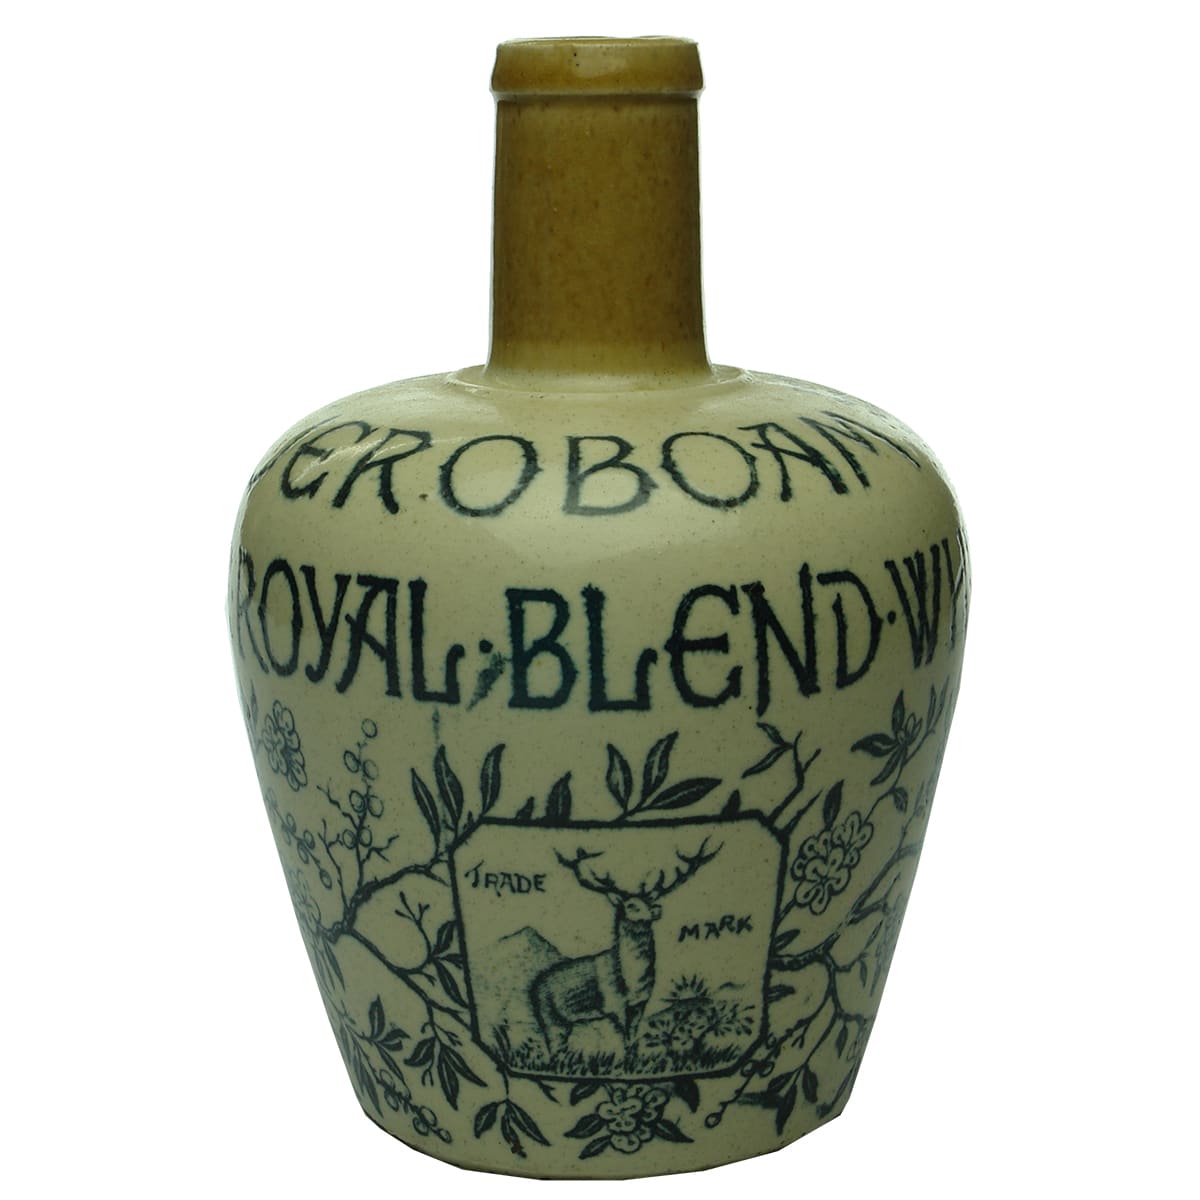 Whisky Jug. Jeroboam. The Royal Blend. Thomson & Co. Glasgow. Stag. Small size.